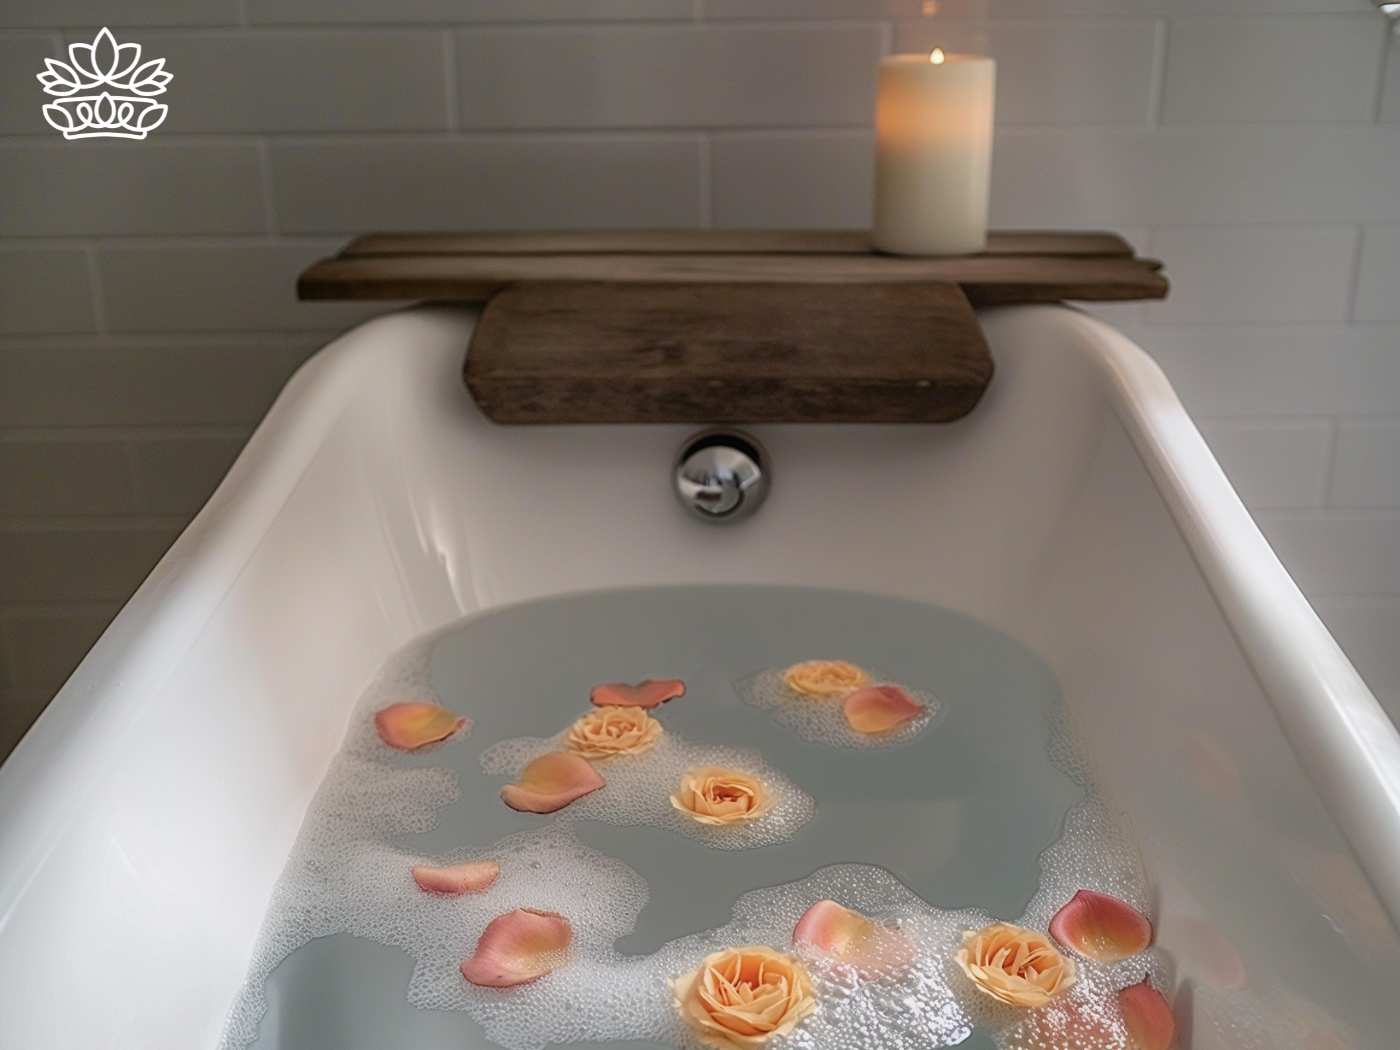 A peaceful bath setting with a rustic wooden bath caddy, a lit candle creating a calming ambiance, and floating peach rose petals, a signature relaxation experience by Fabulous Flowers and Gifts.